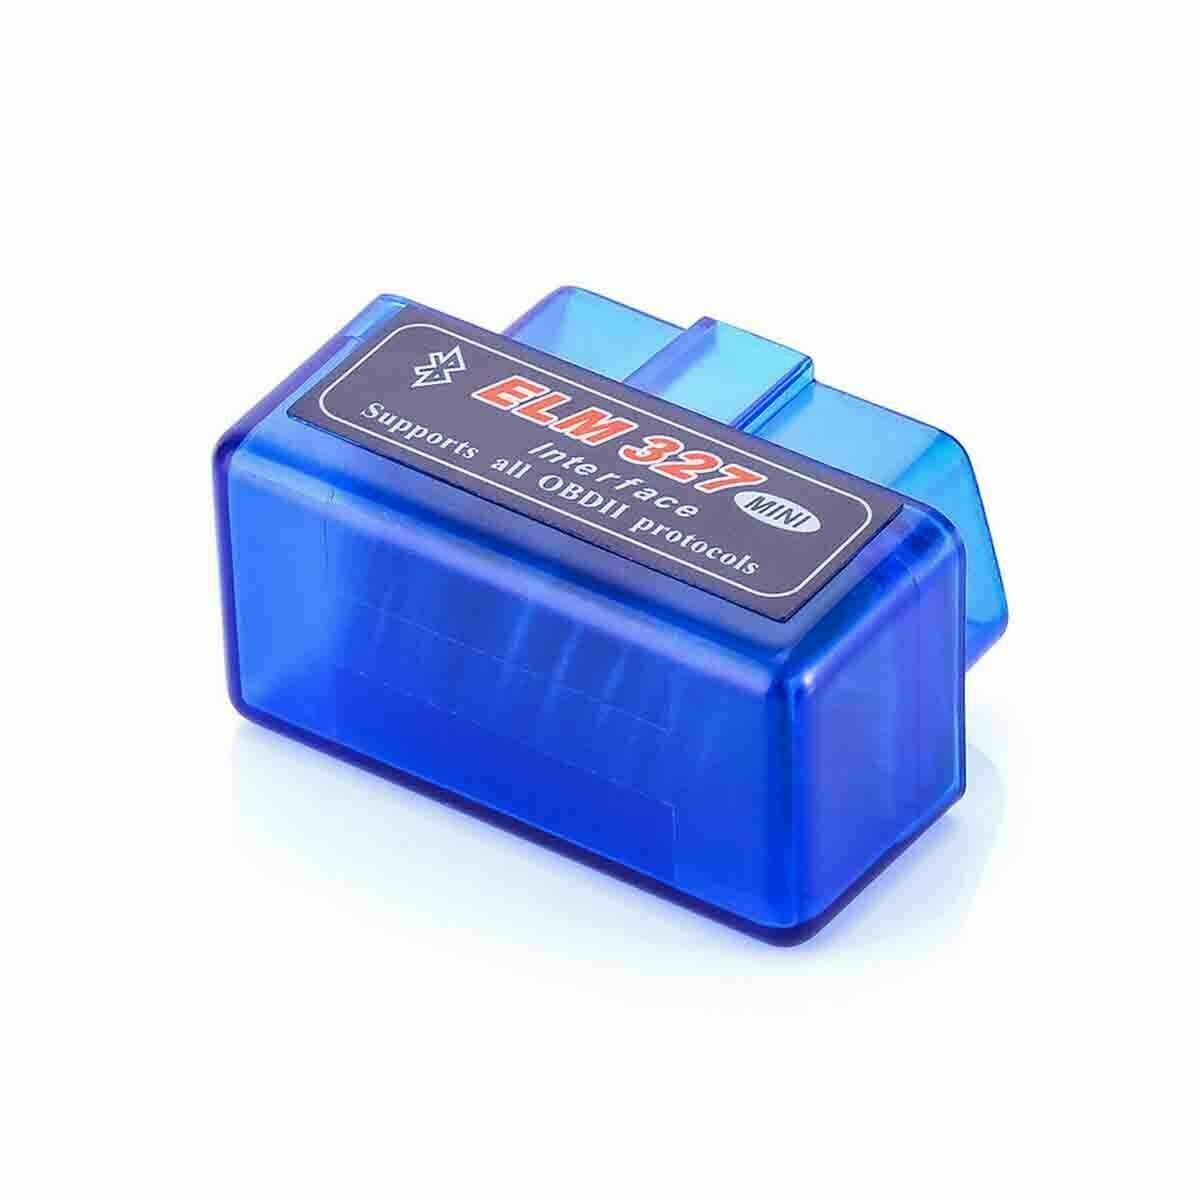 Great Choice Products Elm327 Torque_Pro Bluetooth Obd2 Obdii Adapter Car Bluetooth Scanner Code